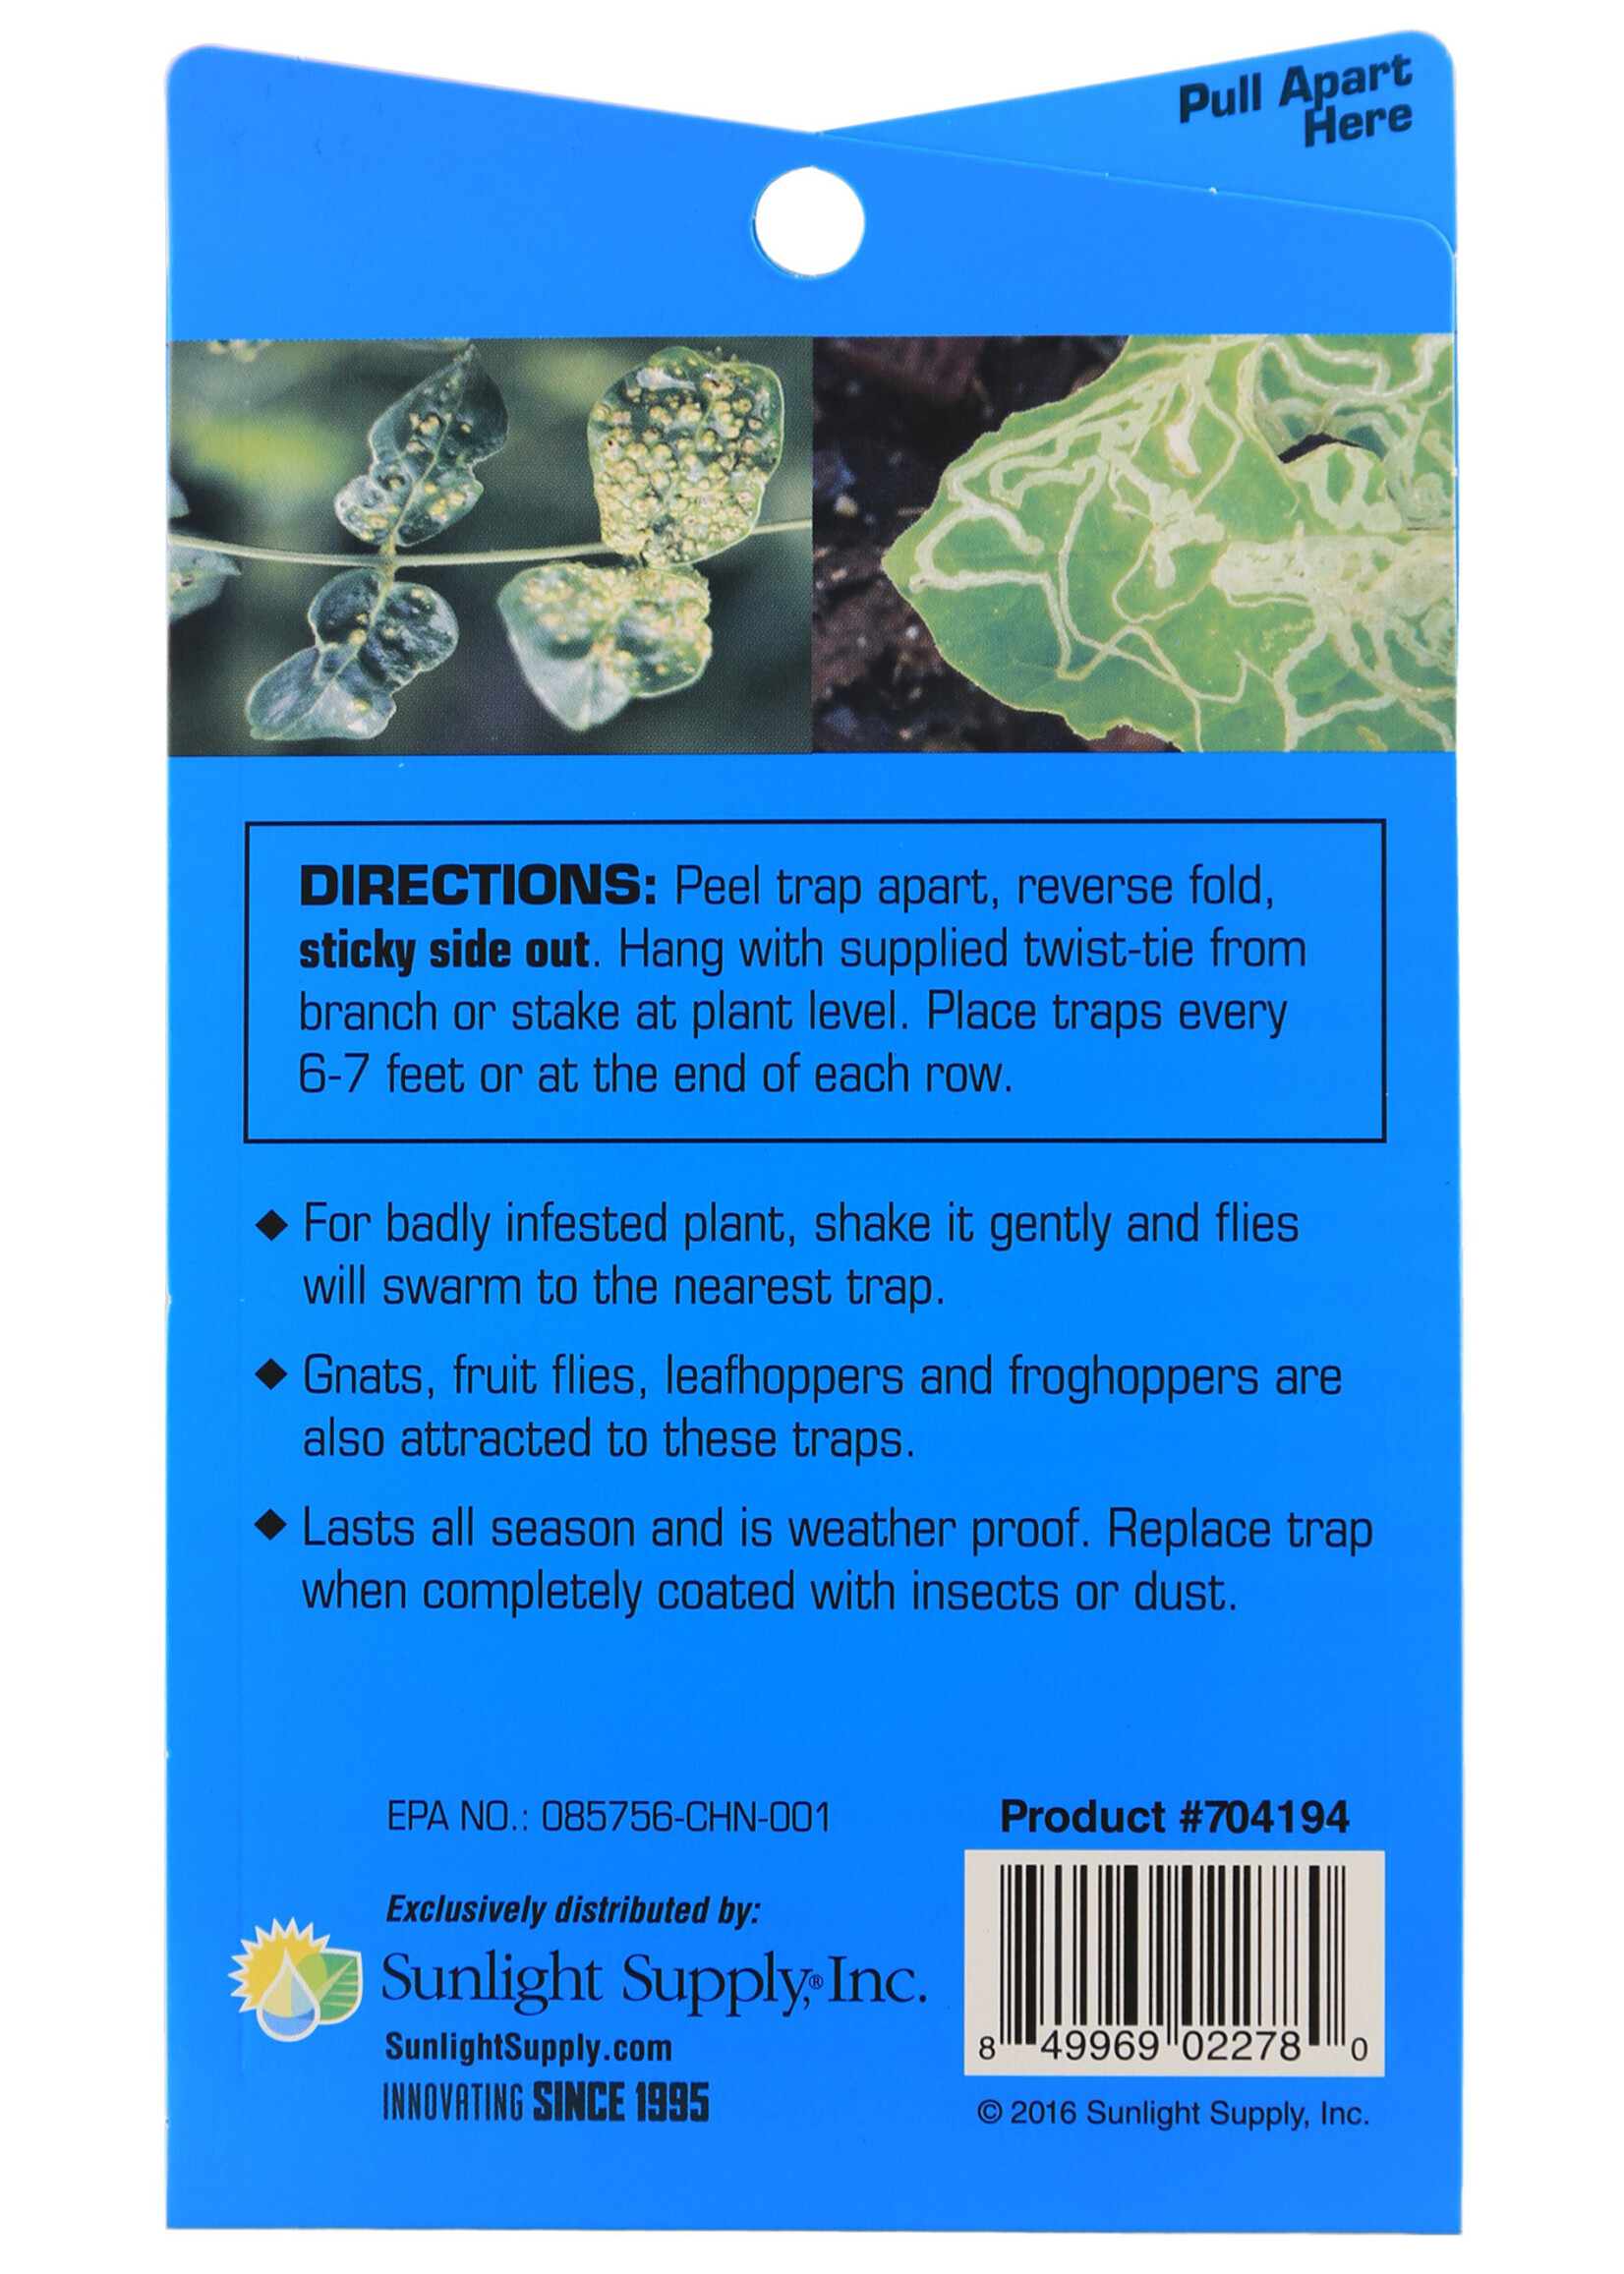 Growers Edge Grower's Edge Thrips & Leafminer Sticky Trap 5/Pack (80/Cs)